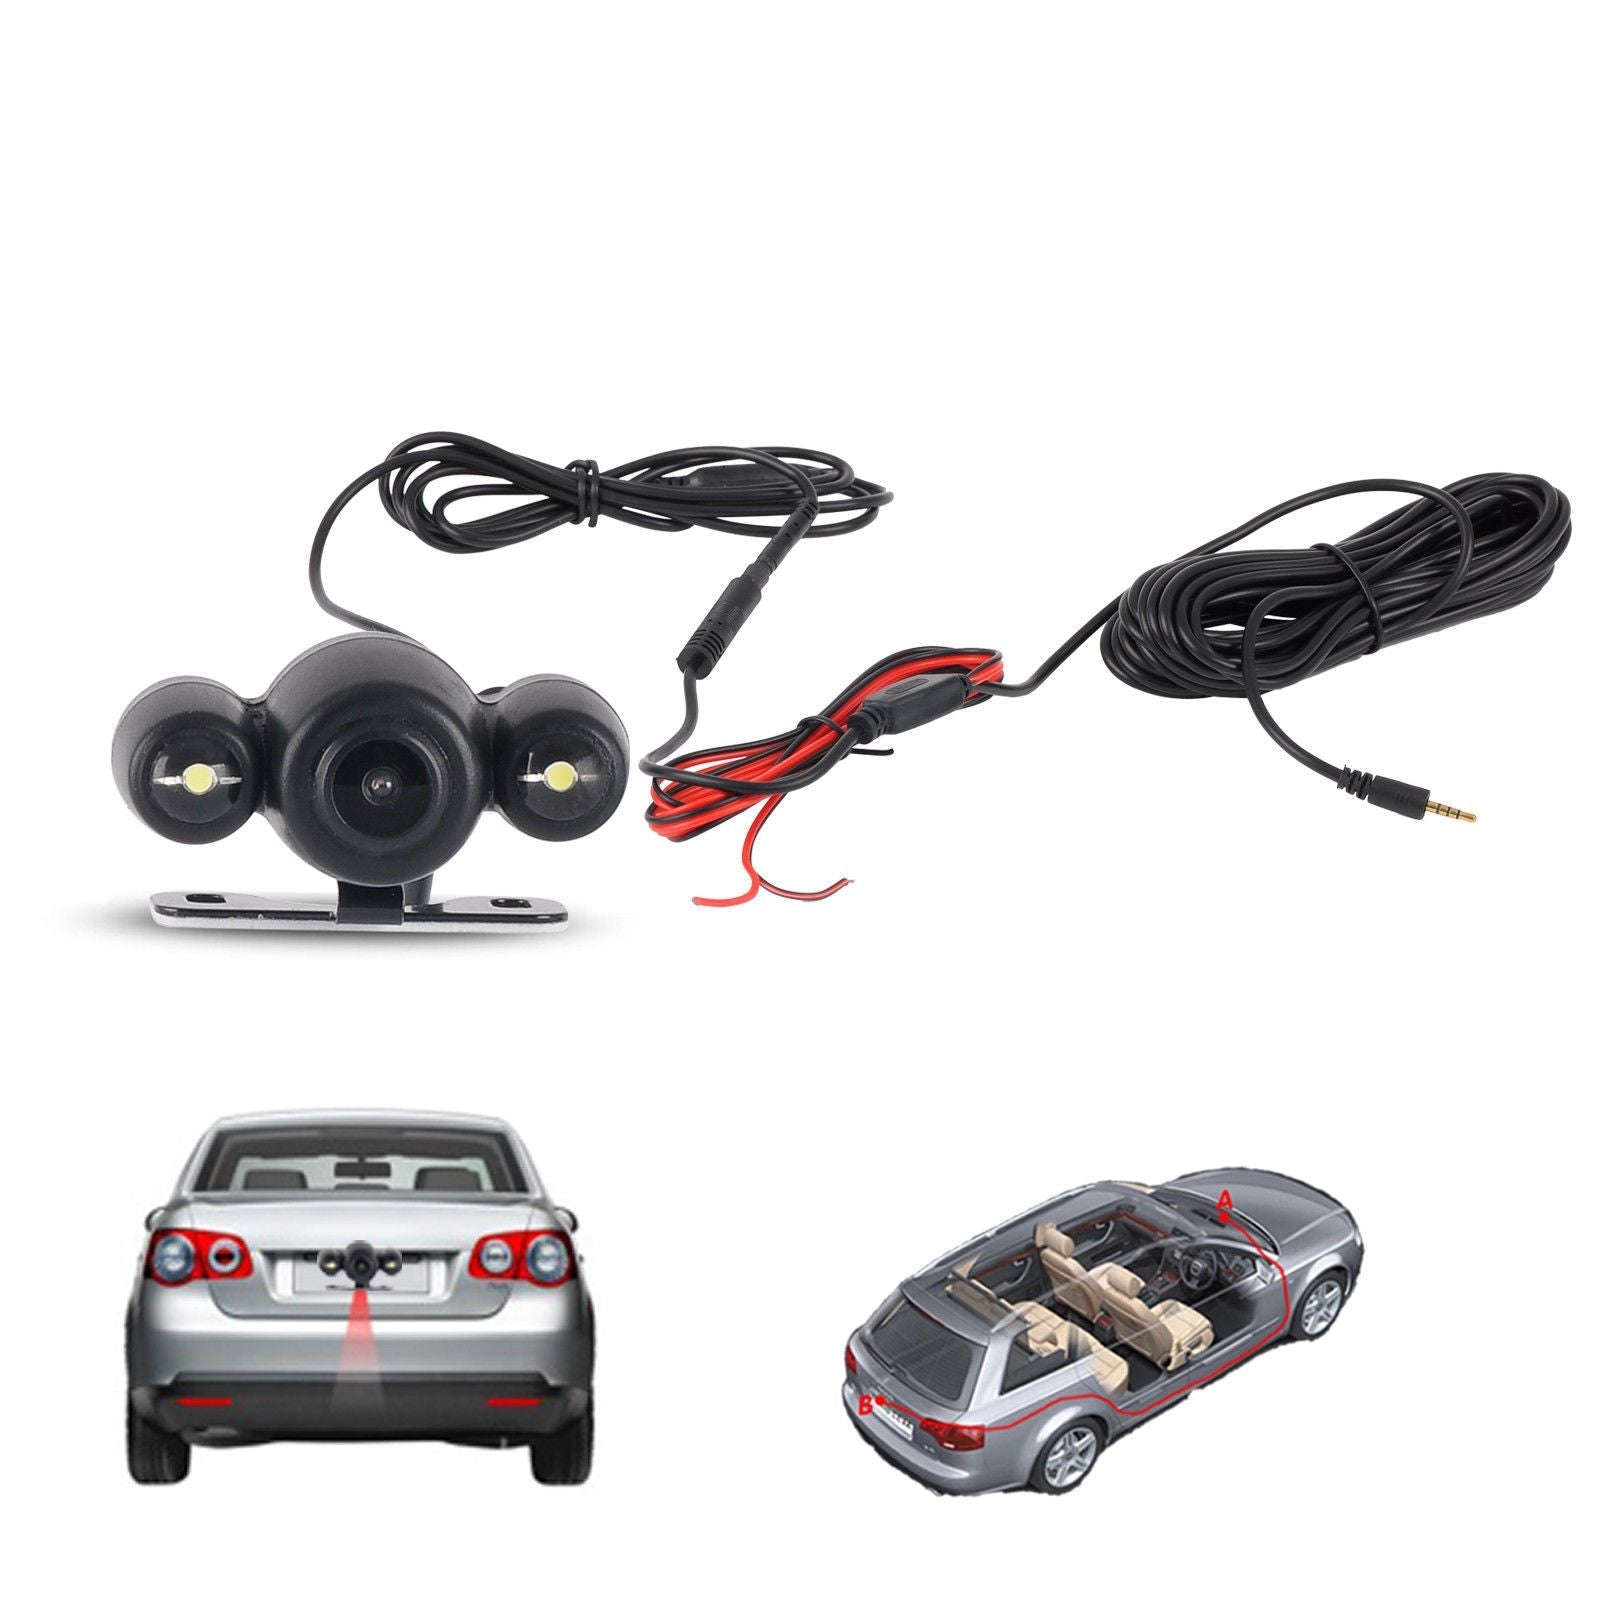 Cost-effective and Most worthwhile Waterproof Parking Assistant Wired Car Backup Camera - XGODY 